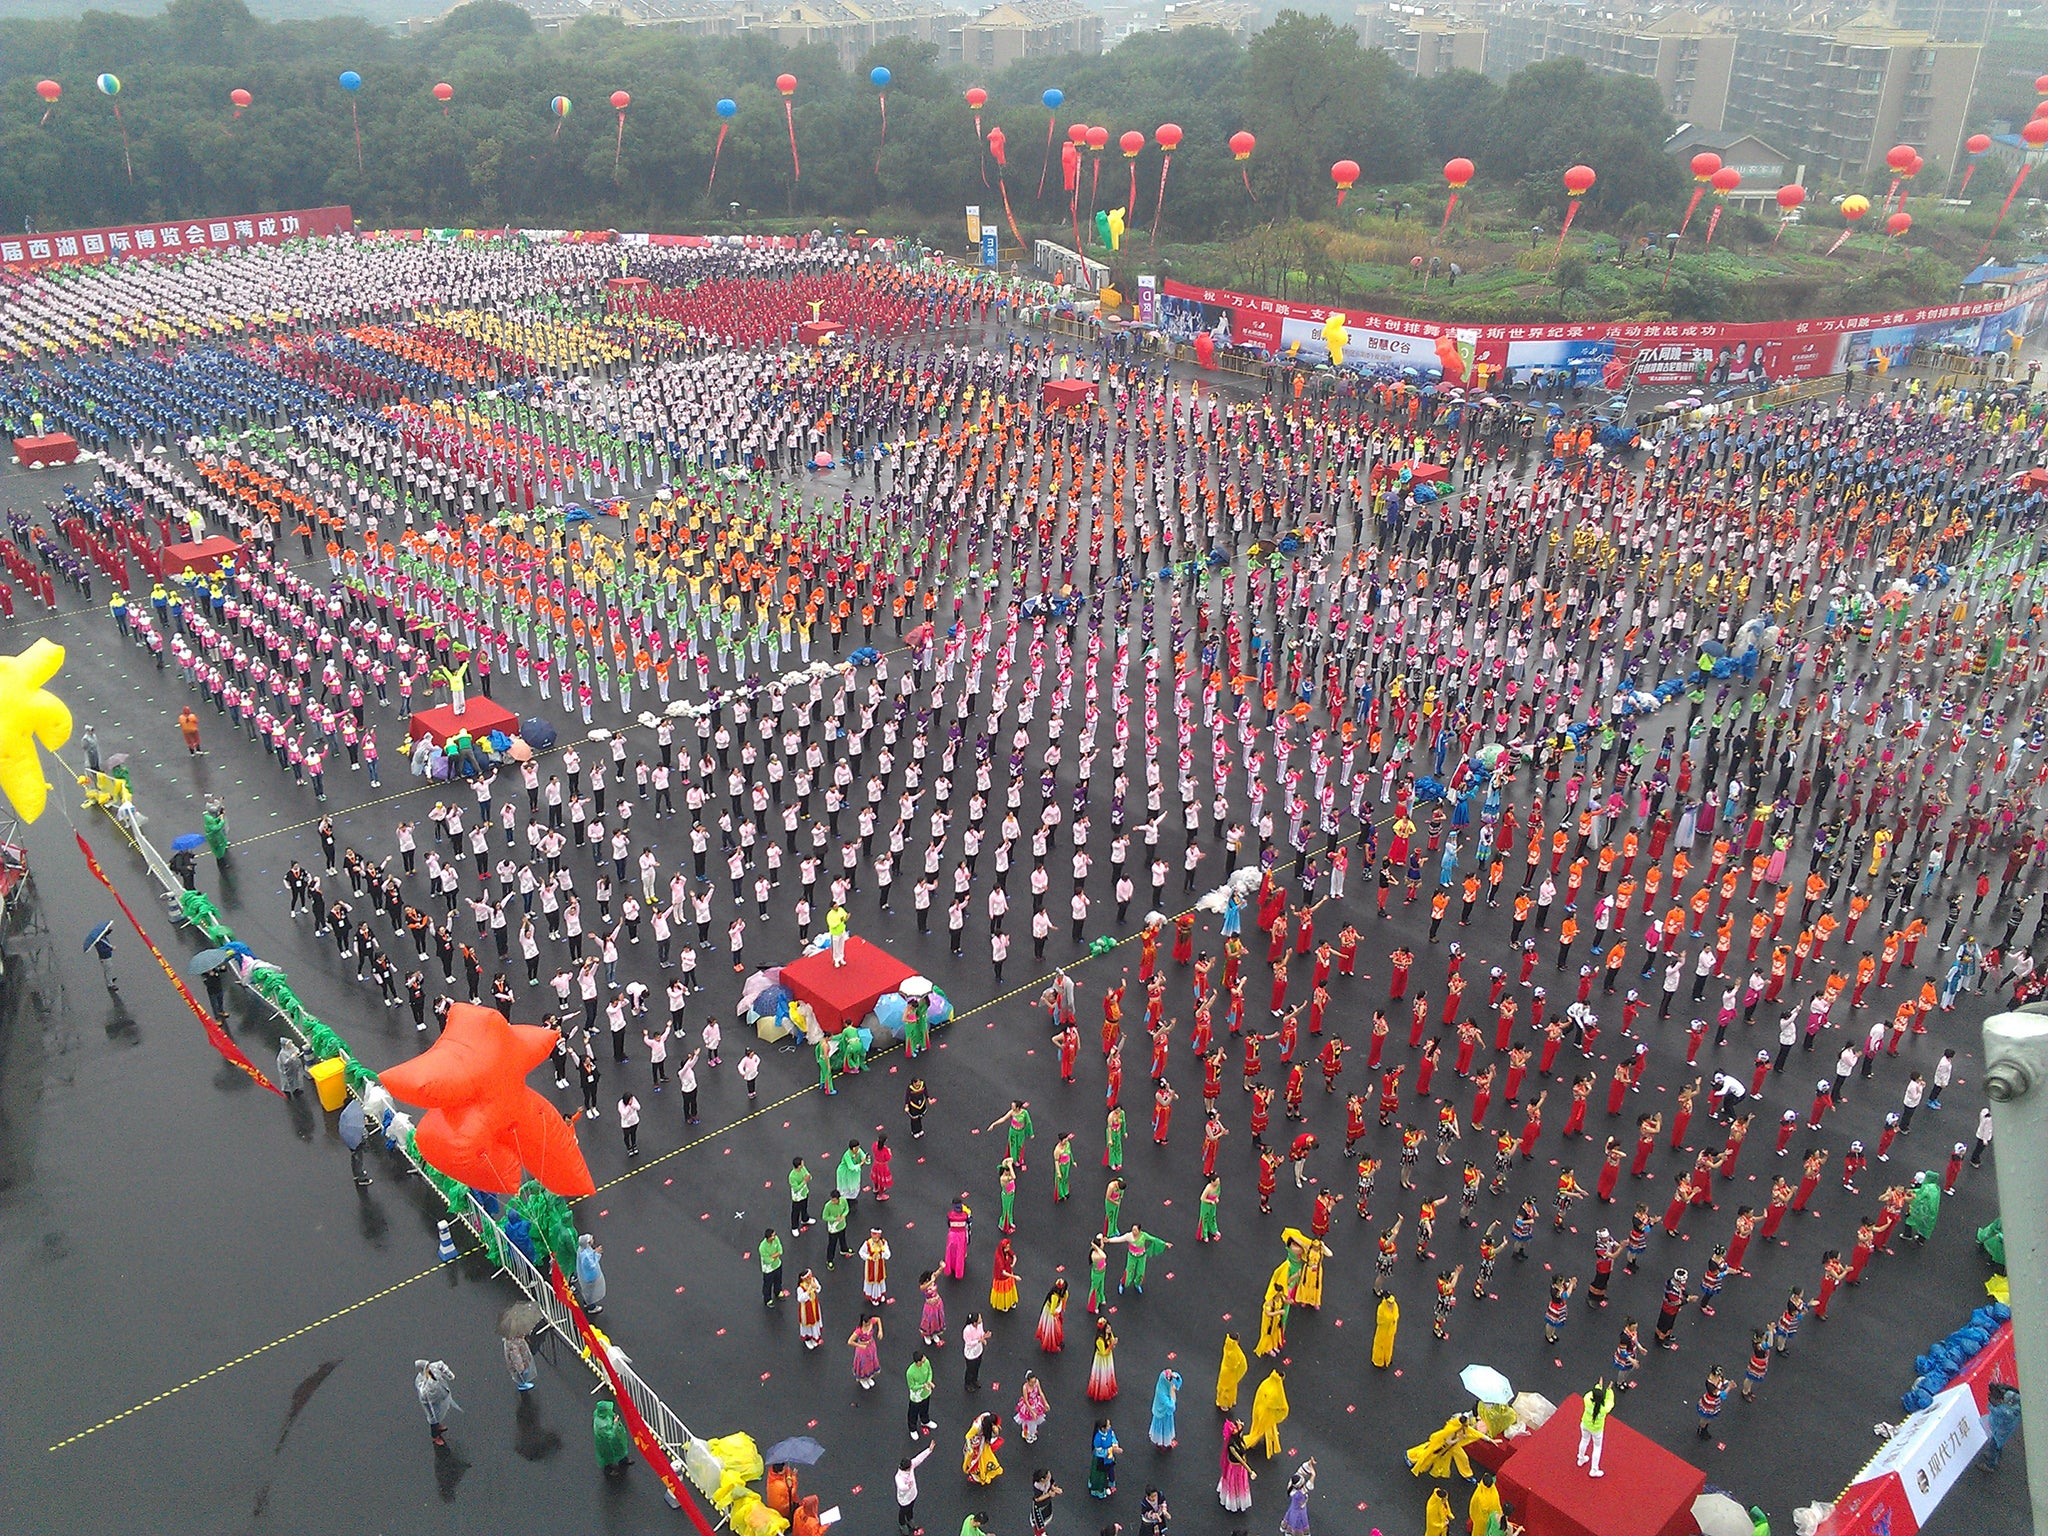 The largest line dance (multiple venues) involved 25,703 participants and was achieved by China Line Dance Sport Promotion Center (China) in Hangzhou, Zhejiang, China